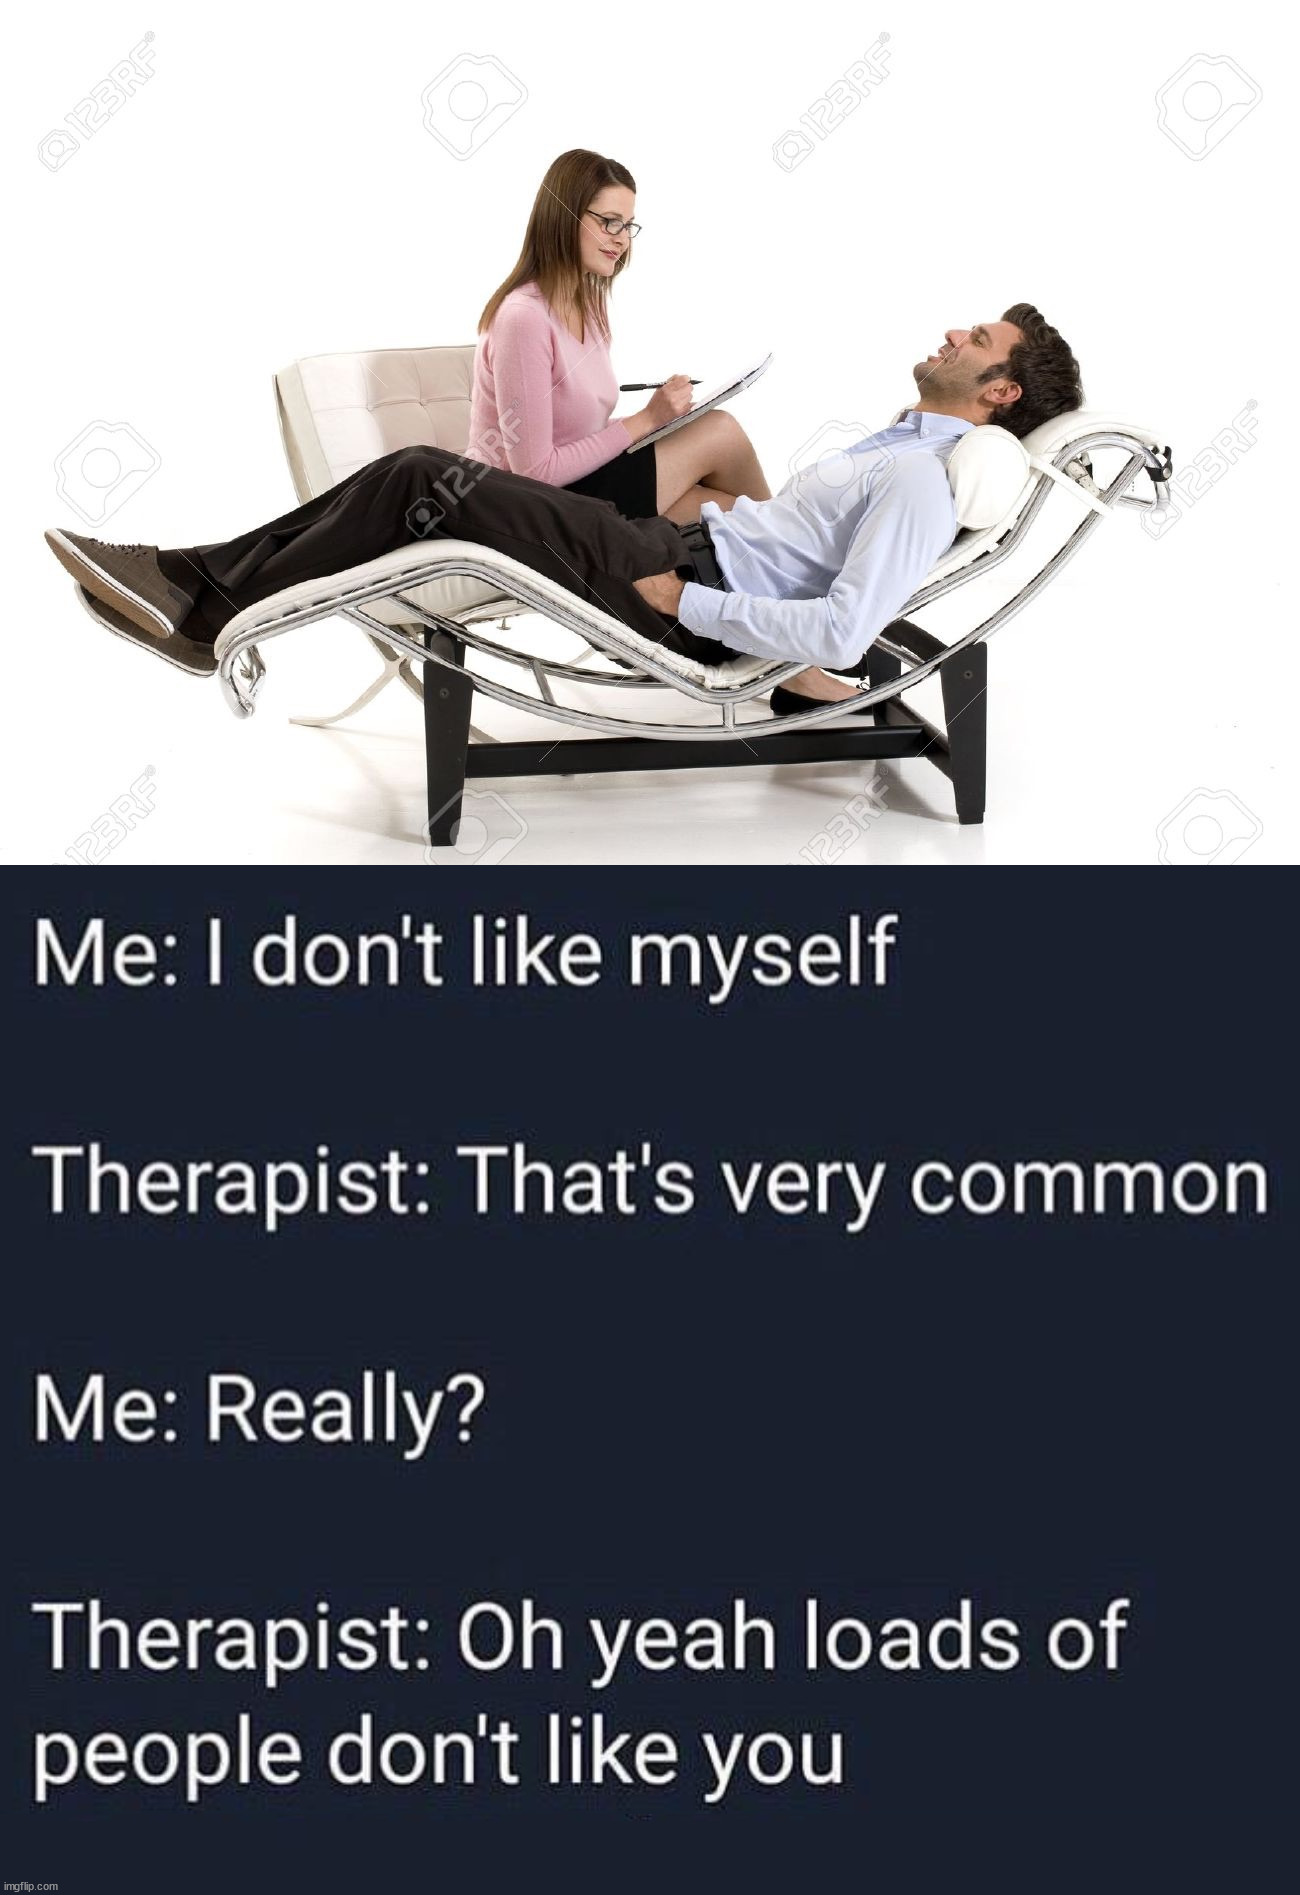 Therapy is not for me either. | image tagged in therapist,insults | made w/ Imgflip meme maker